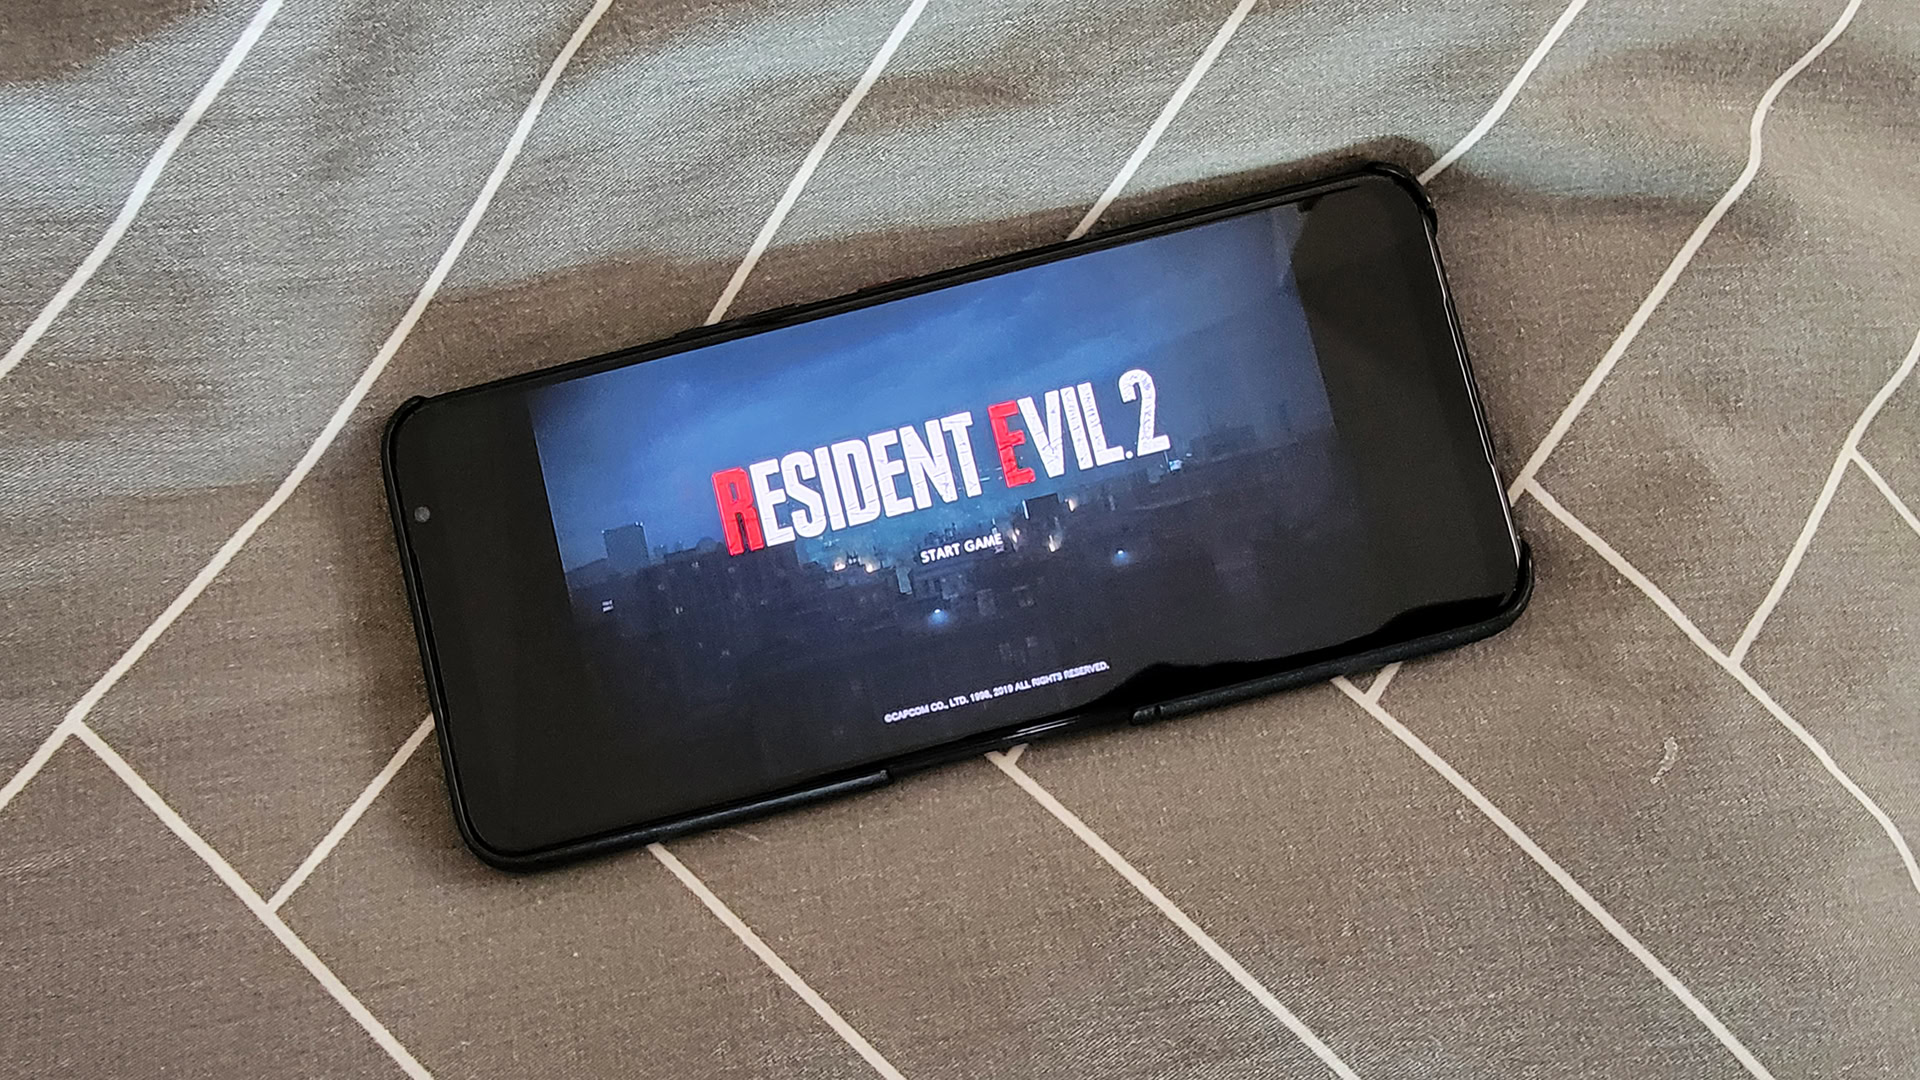 Moonlight Gaming Android Resident Evil 2